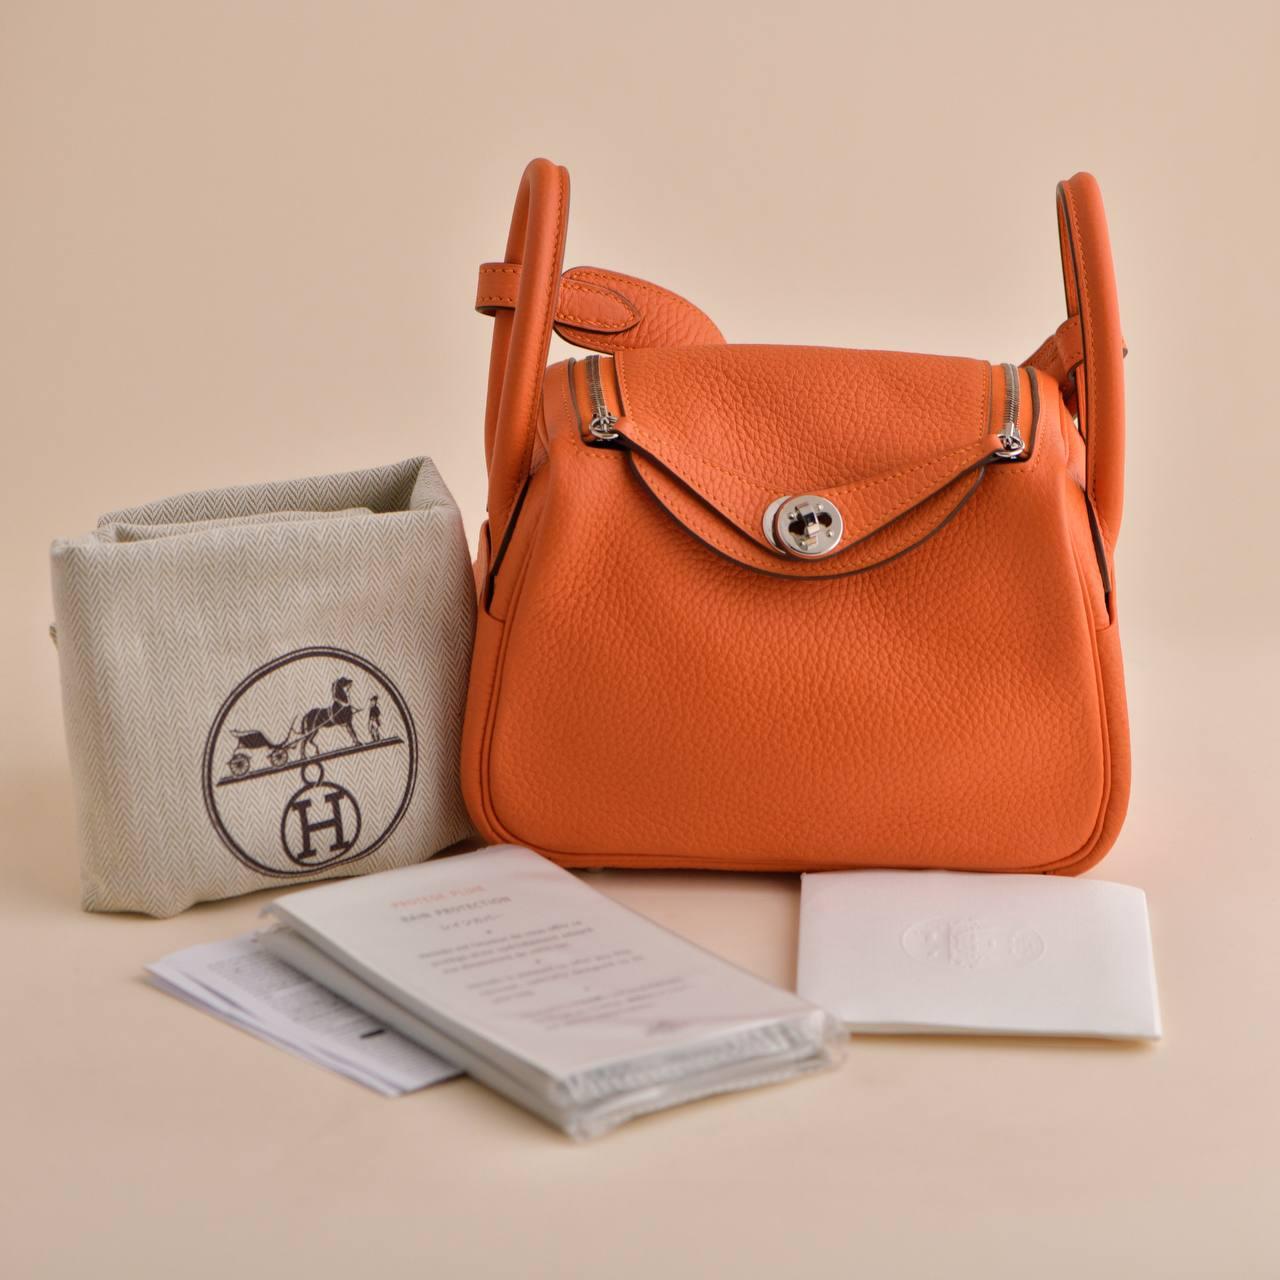 SKU	AT-2453
Comes With	Hermès Box, Dust bag, Strap, and Care booklet
Model	Lindy Mini
Metal	Palladium
Serial Number	Y stamp
Date	2020
Condition	Excellent
Other Info	Shoulder Strap Drop: Approx 100cm Length:Approx 18cm Width: Approx 12cm Depth: